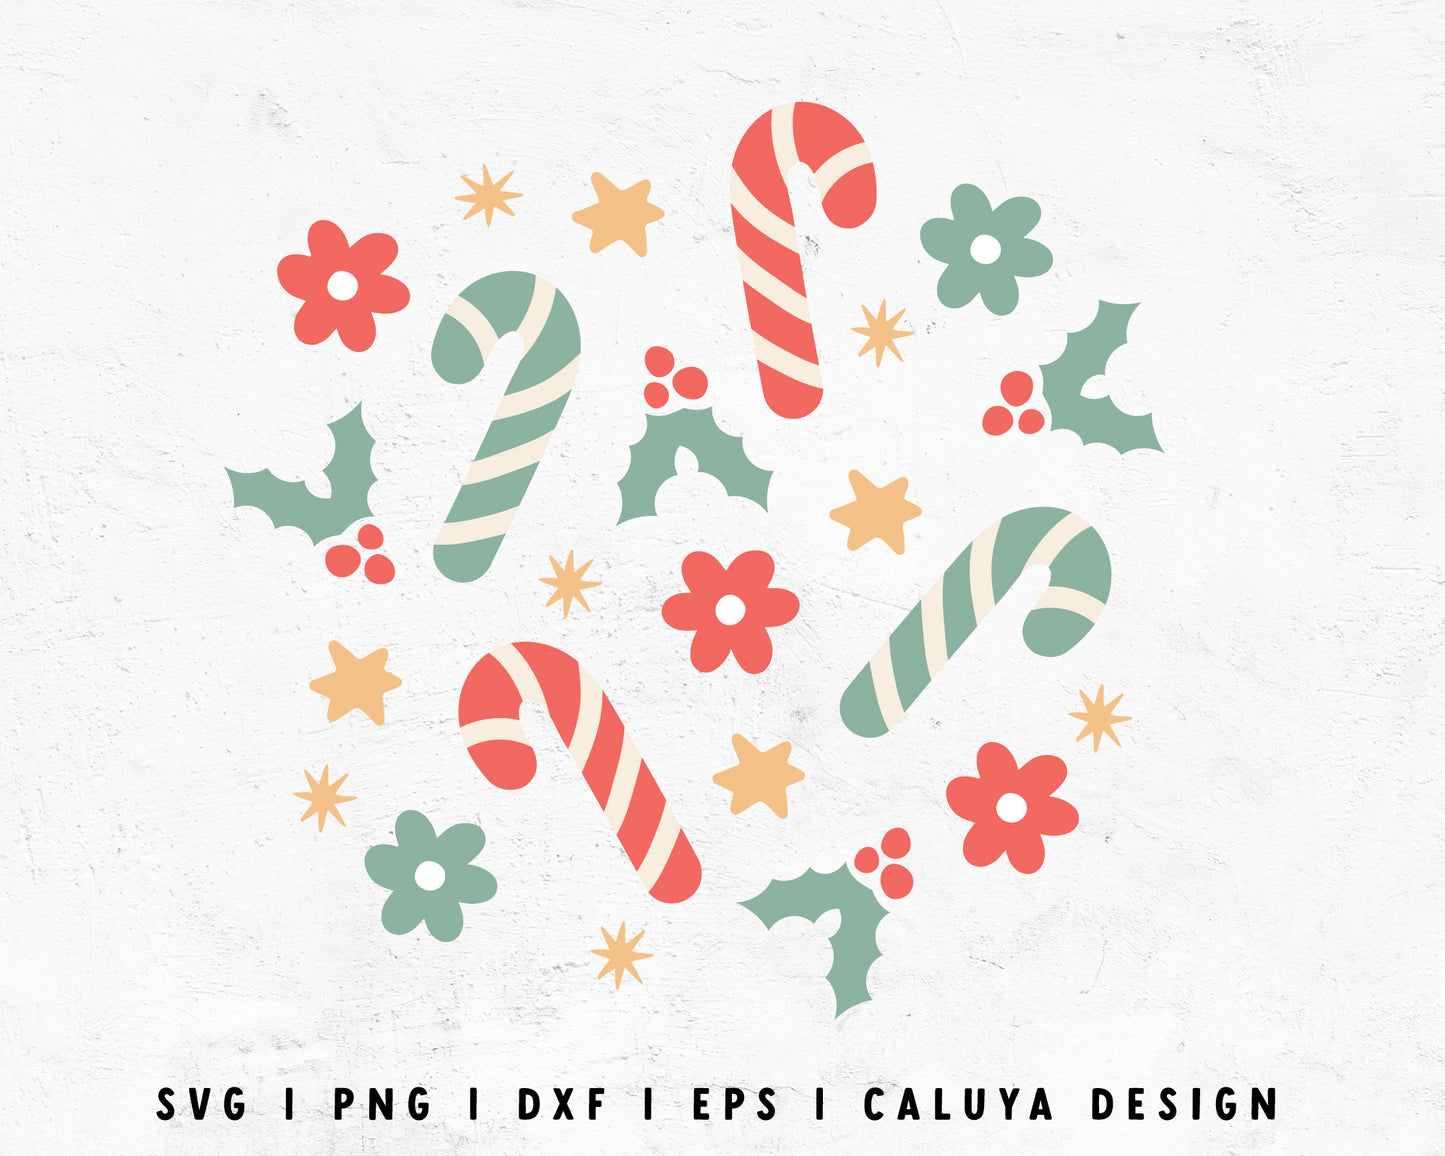 FREE Candy Cane Digital Pattern SVG | Pastel Christmas SVG Cut File for Cricut, Cameo Silhouette | Free SVG Cut File